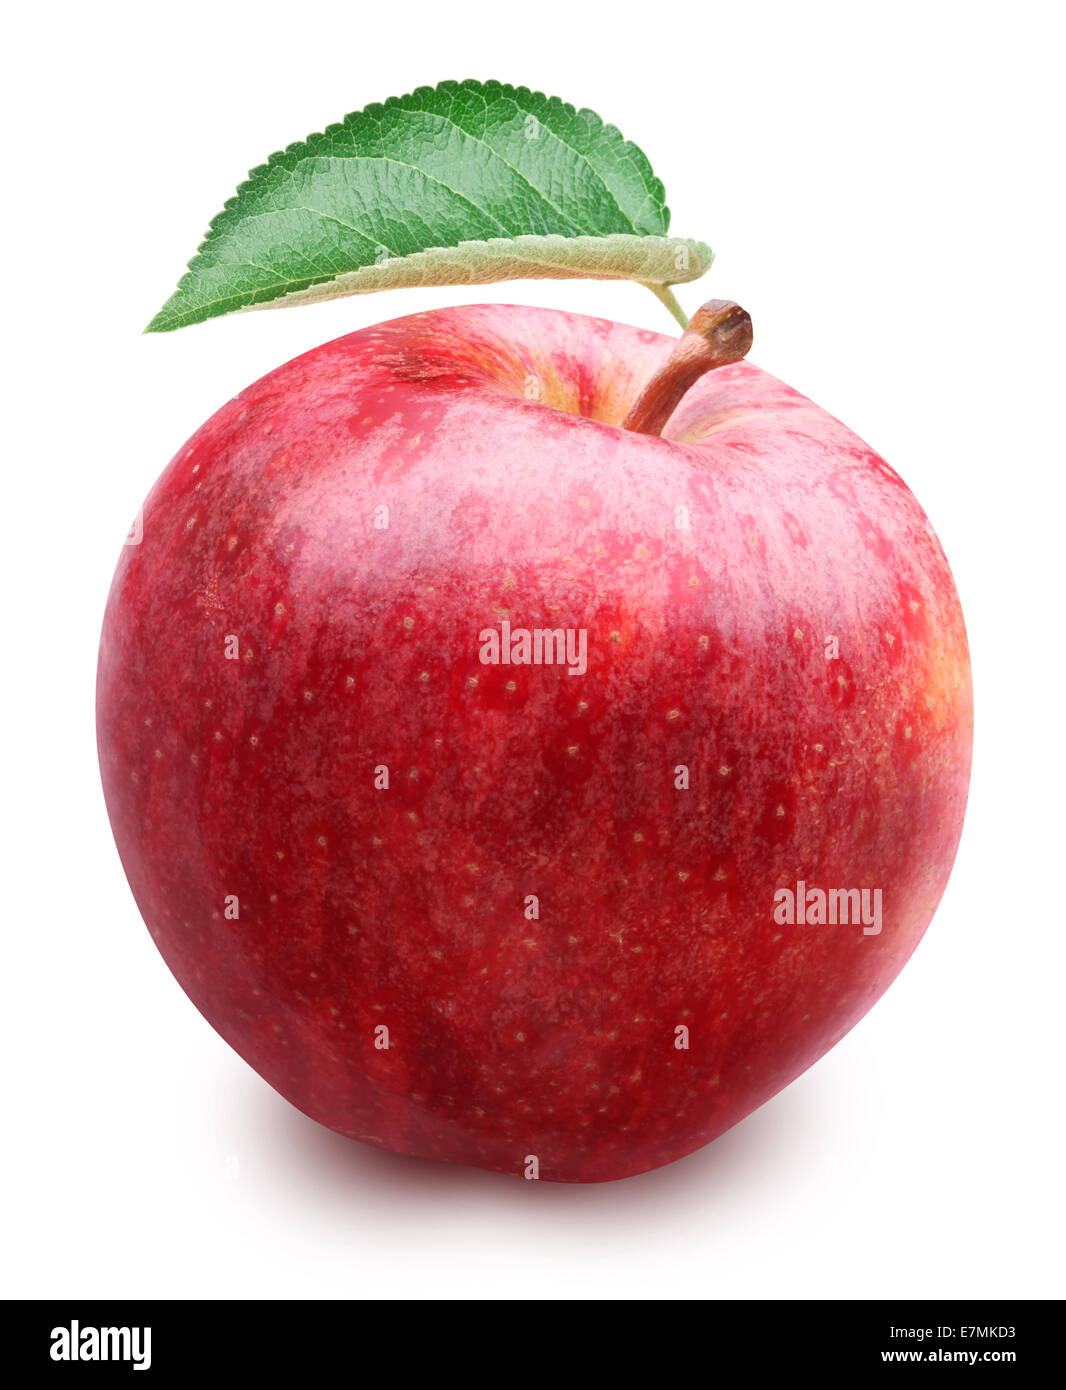 Red apple with leaf isolated on a white background. File contains clipping paths. Stock Photo